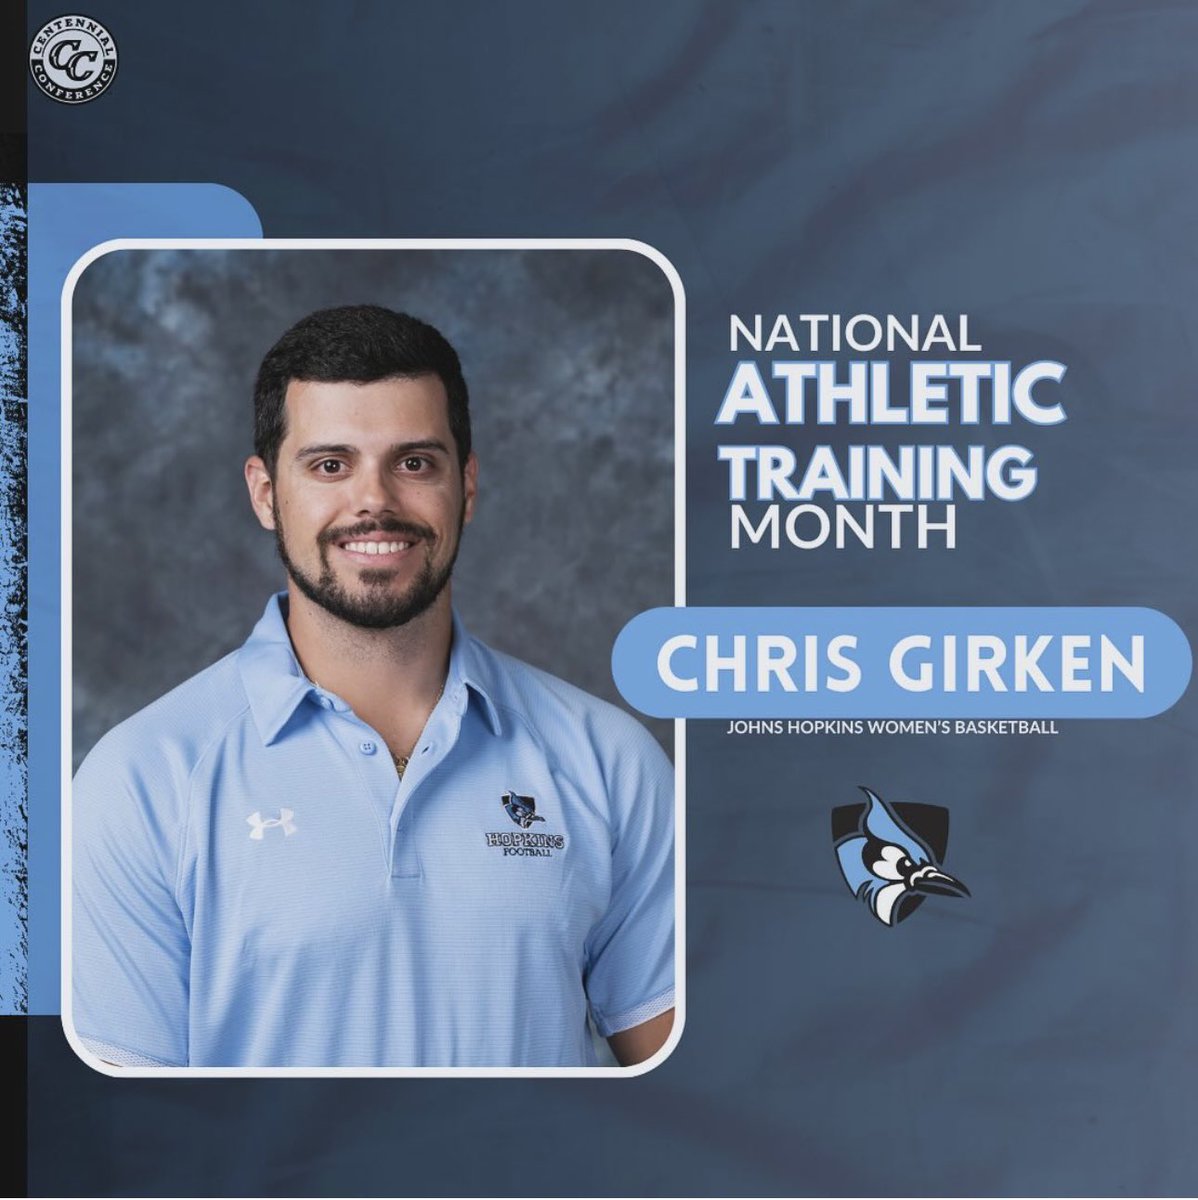 Happy National Athletic Training Month to our fave Chris Girken! 🏀 #gohop